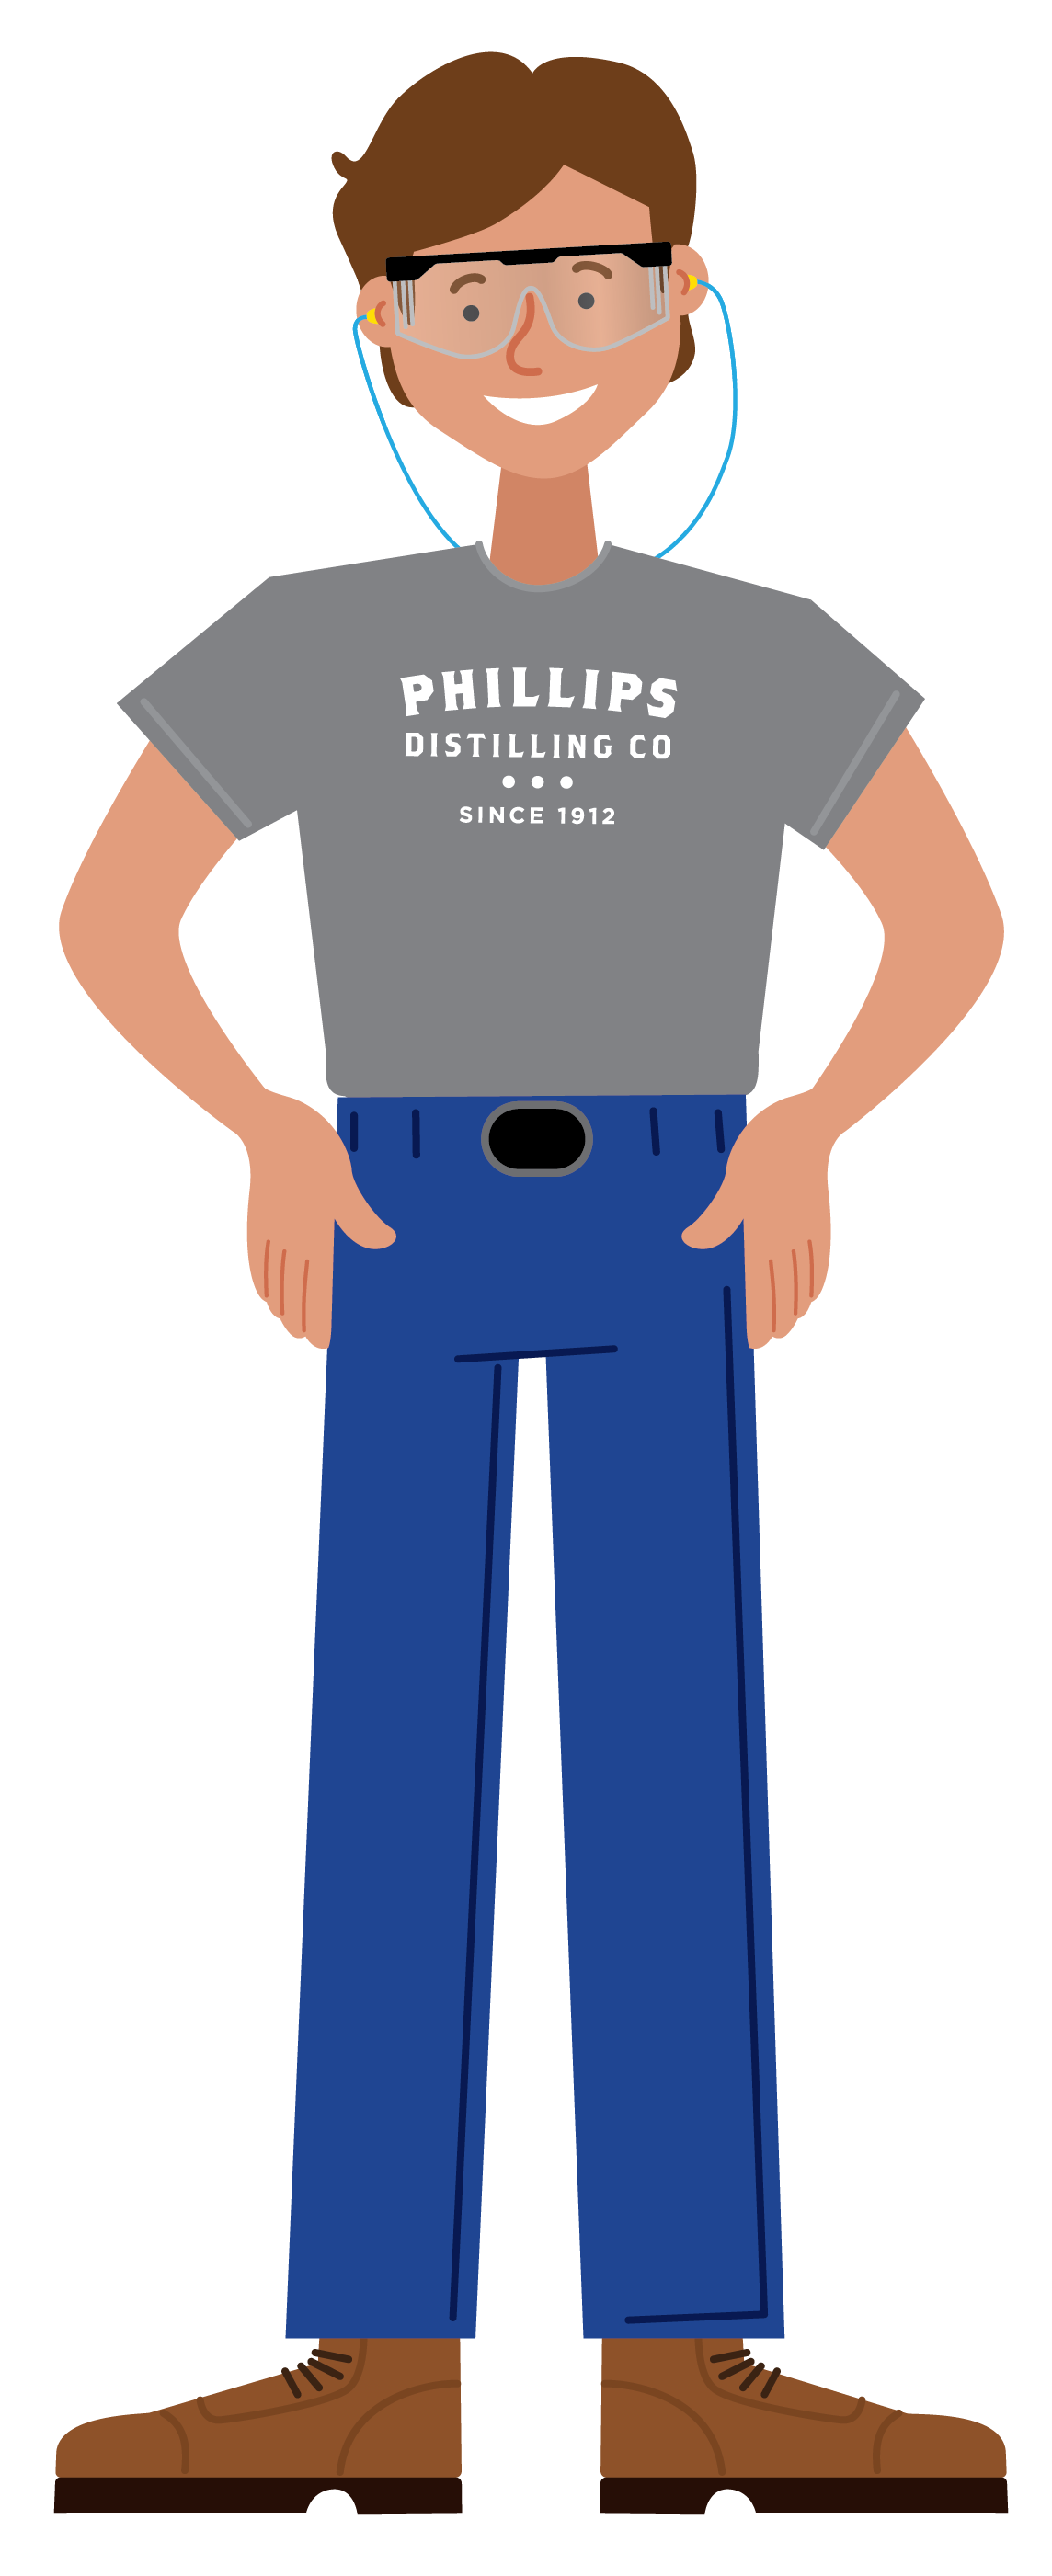 An illustration of Phil smiling with hands on hips